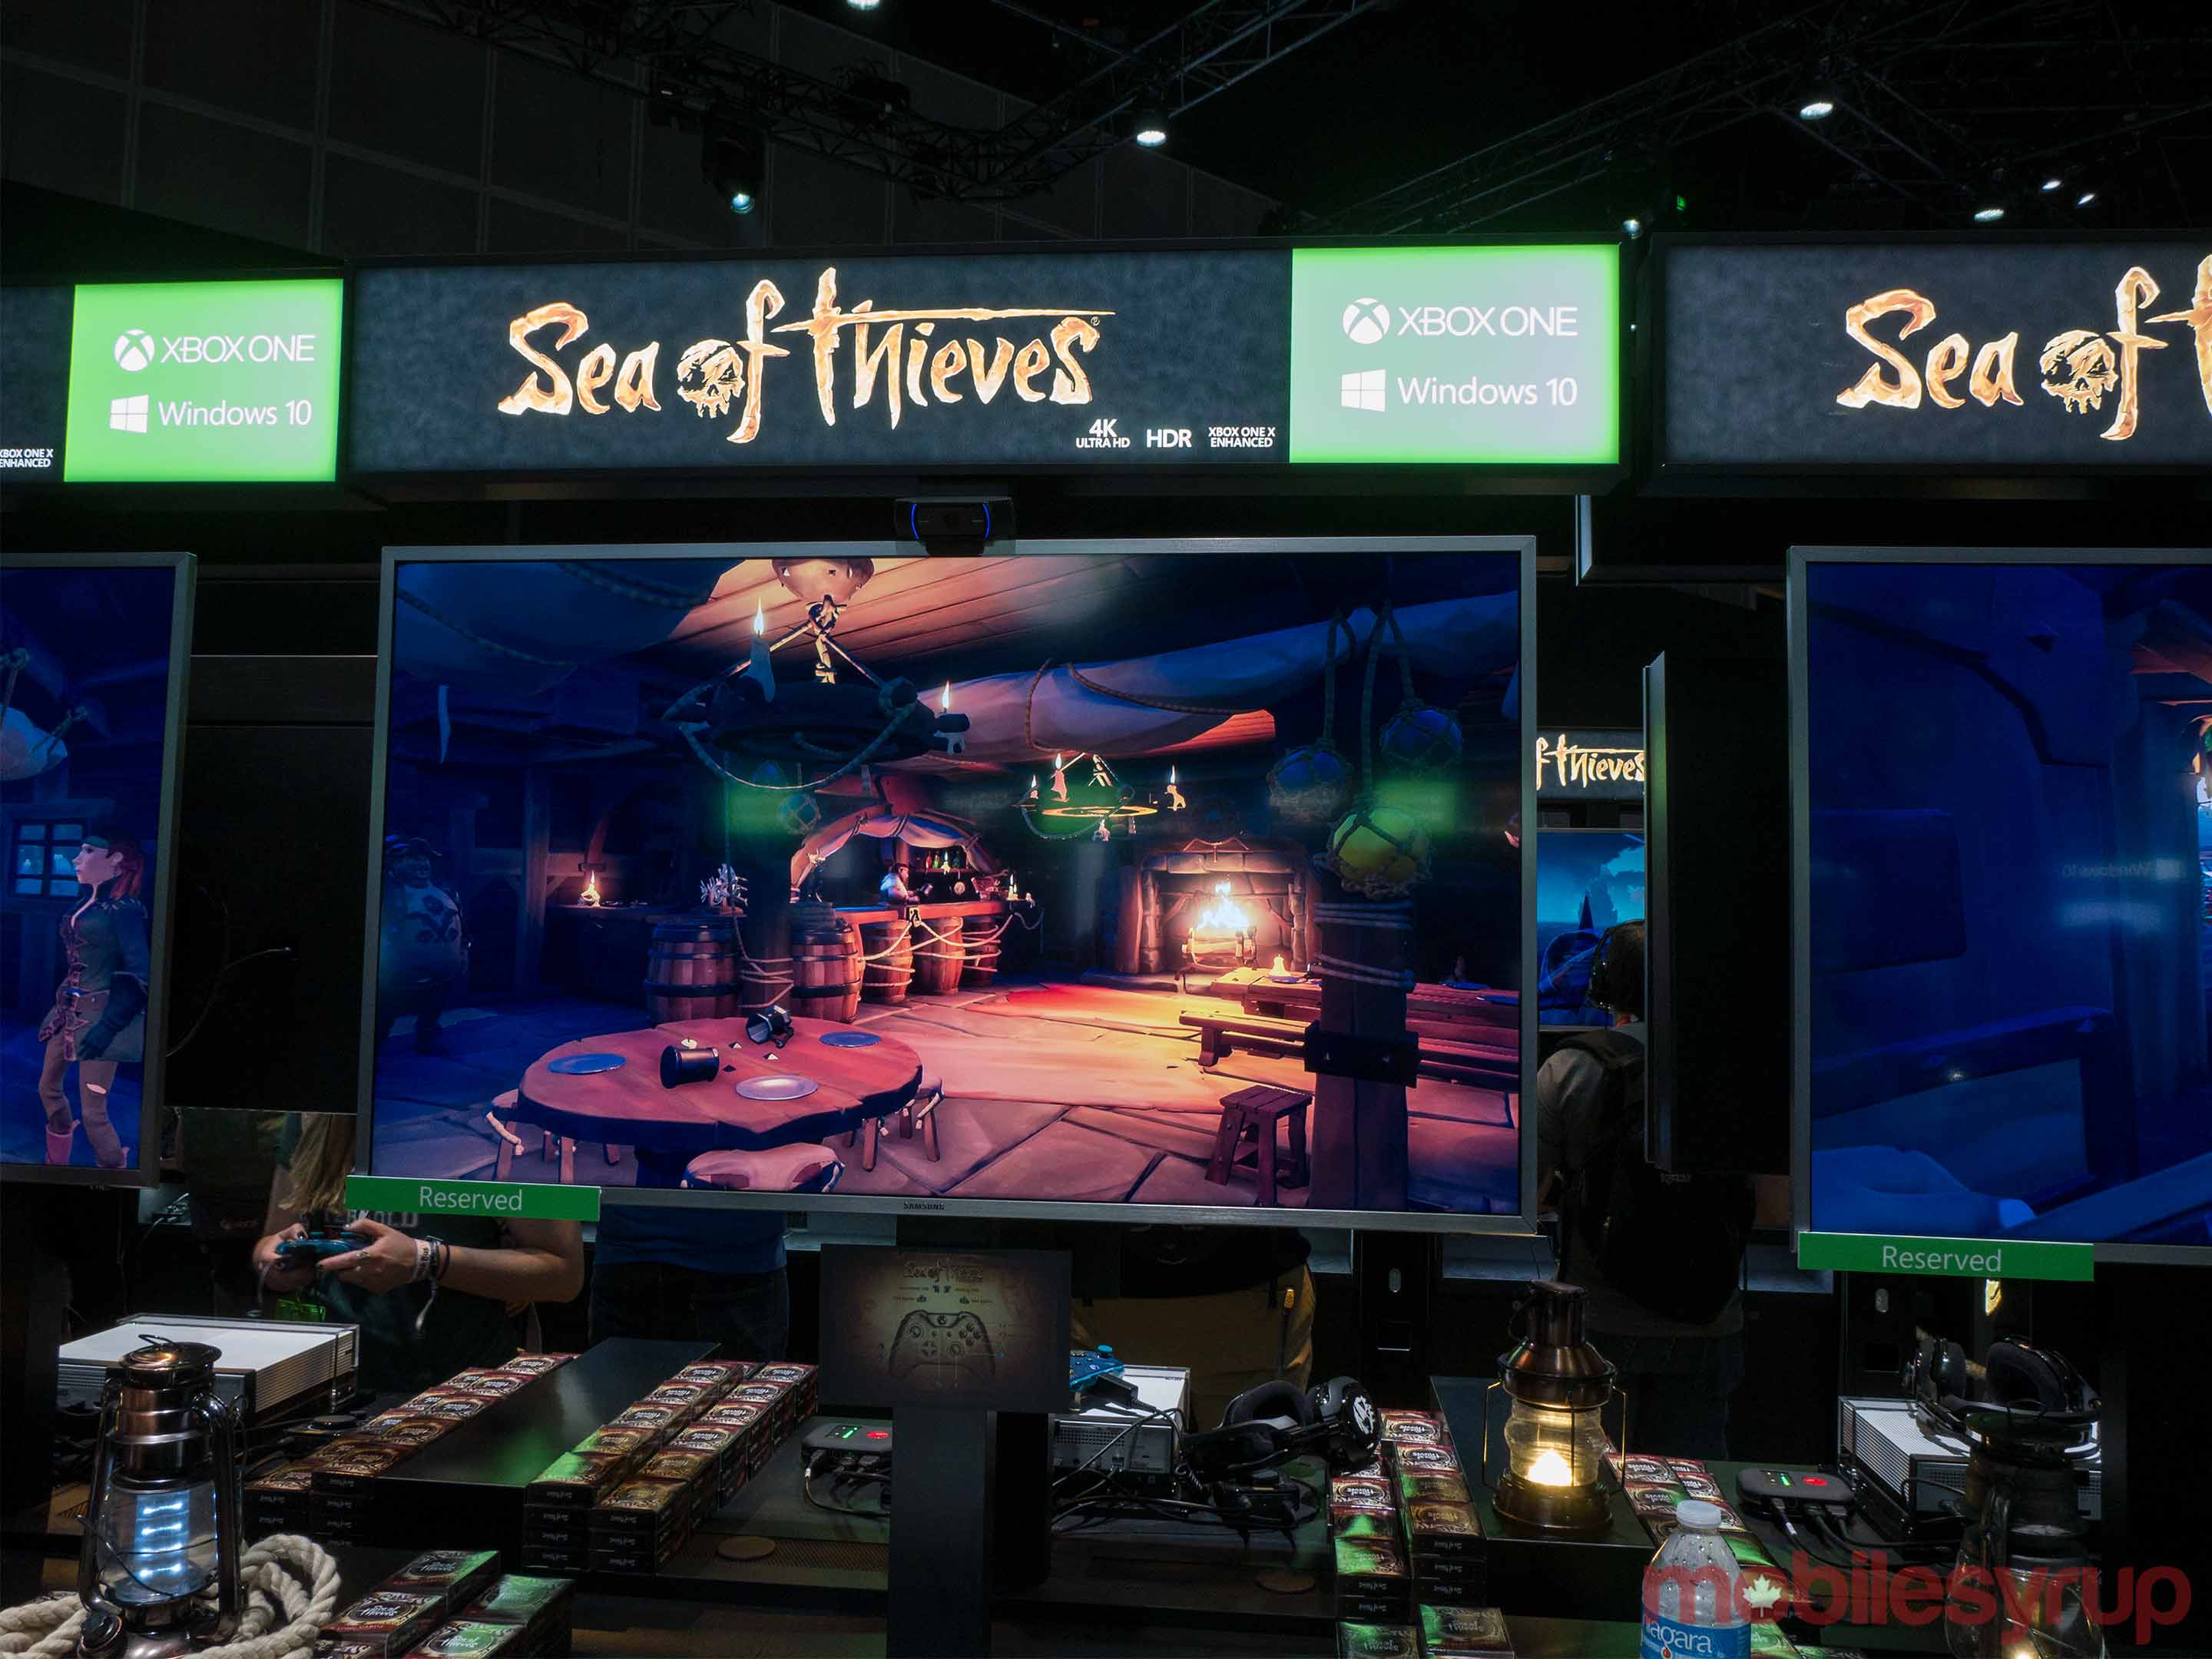 Sea of Thieves on the E3 show floor